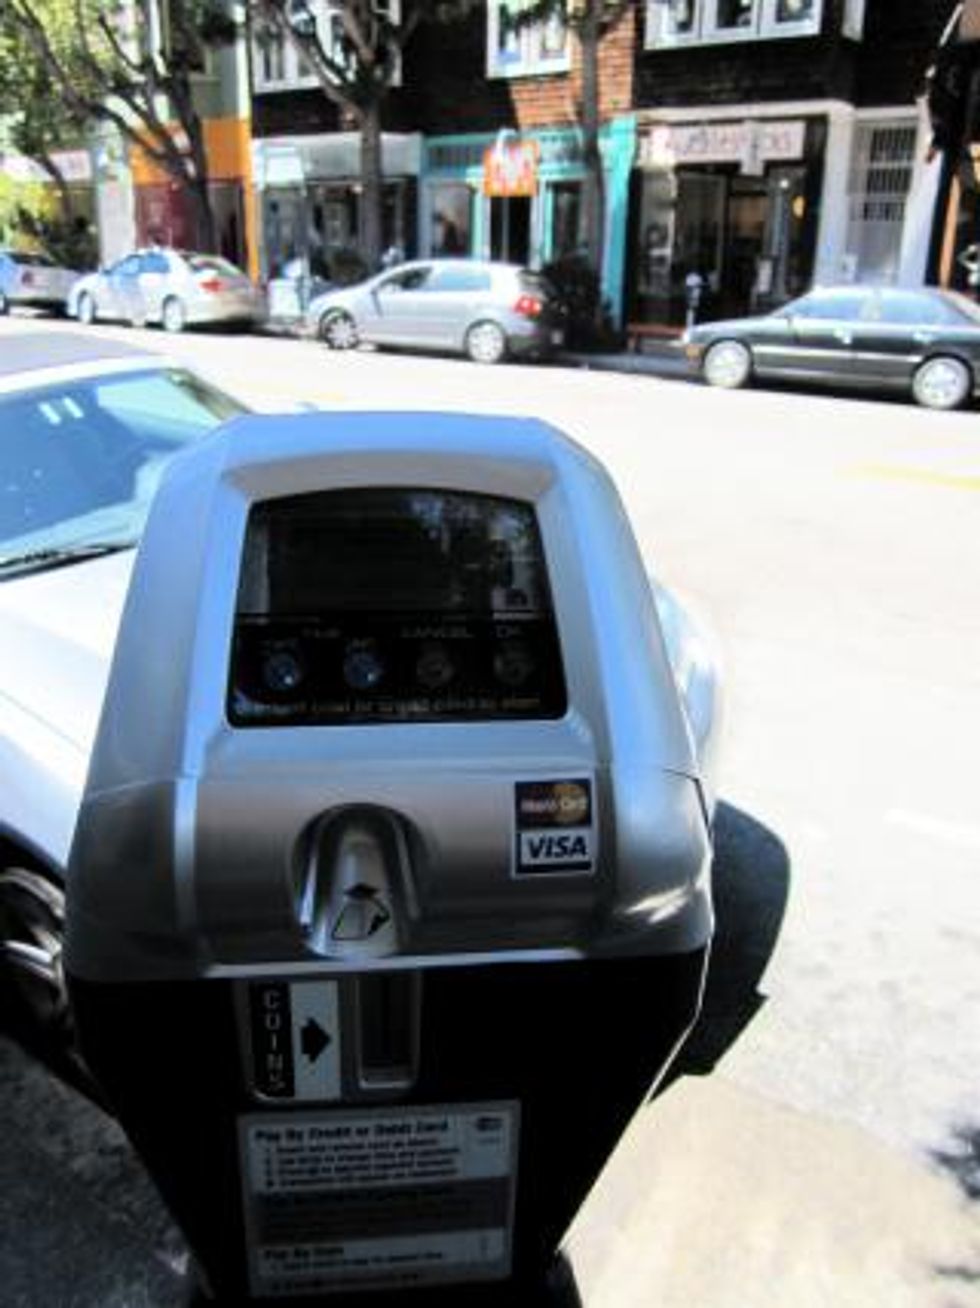 Transported: The City's 270 New Smart Parking Meters, Found!